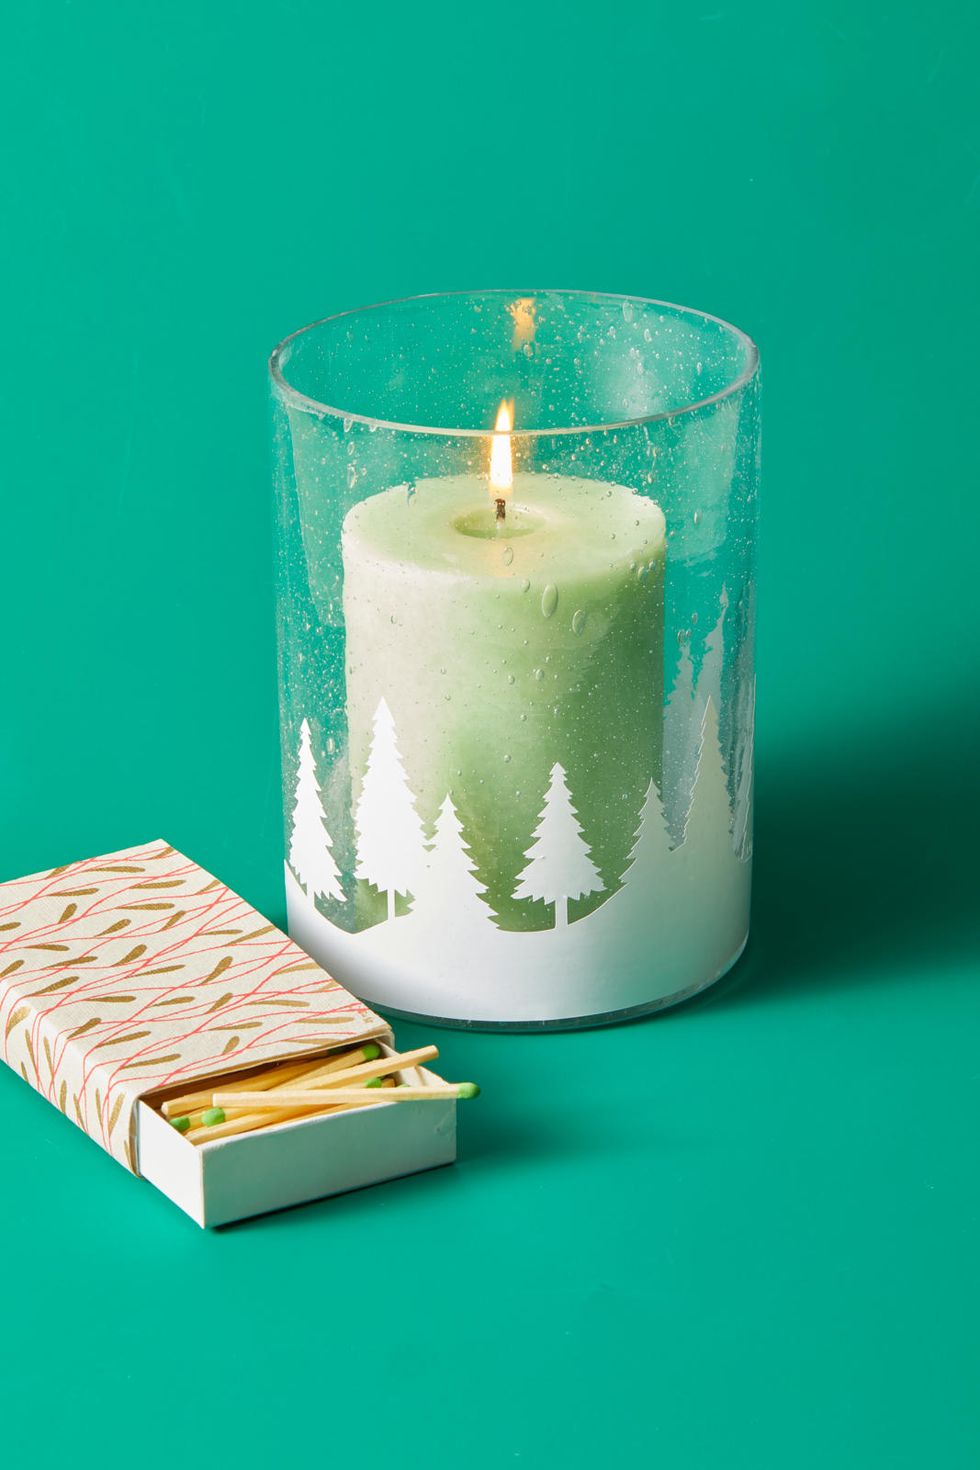 https://hips.hearstapps.com/hmg-prod/images/diy-christms-gifts-cutout-candle-1571340085.jpeg?crop=0.999687597625742xw:1xh;center,top&resize=980:*